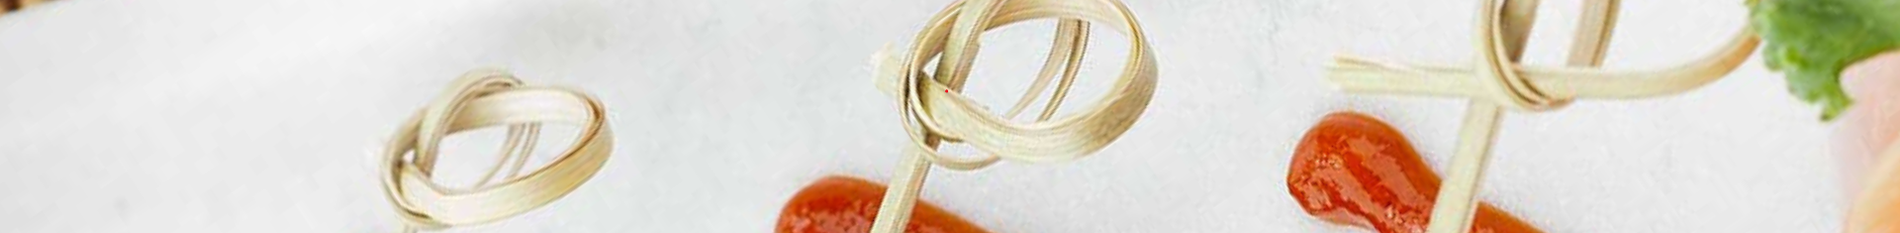 Blog-Banner-knotted-bamboo-skewers-great-for-holding-together-this-tasty-burger-recipe